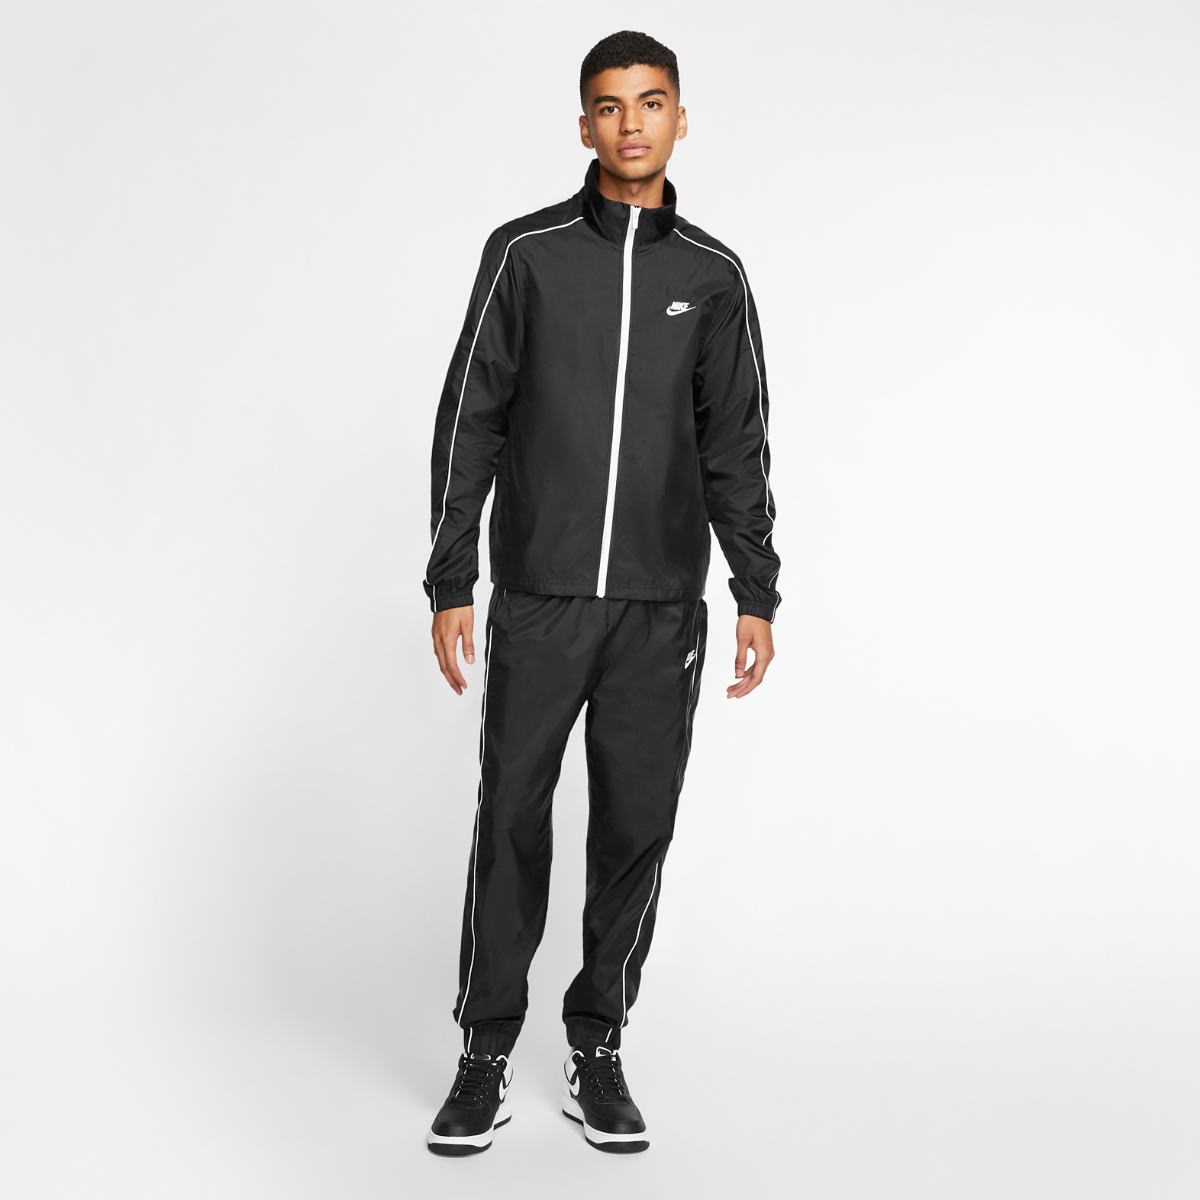 Nike Woven Warmup Tracksuit 329608-405